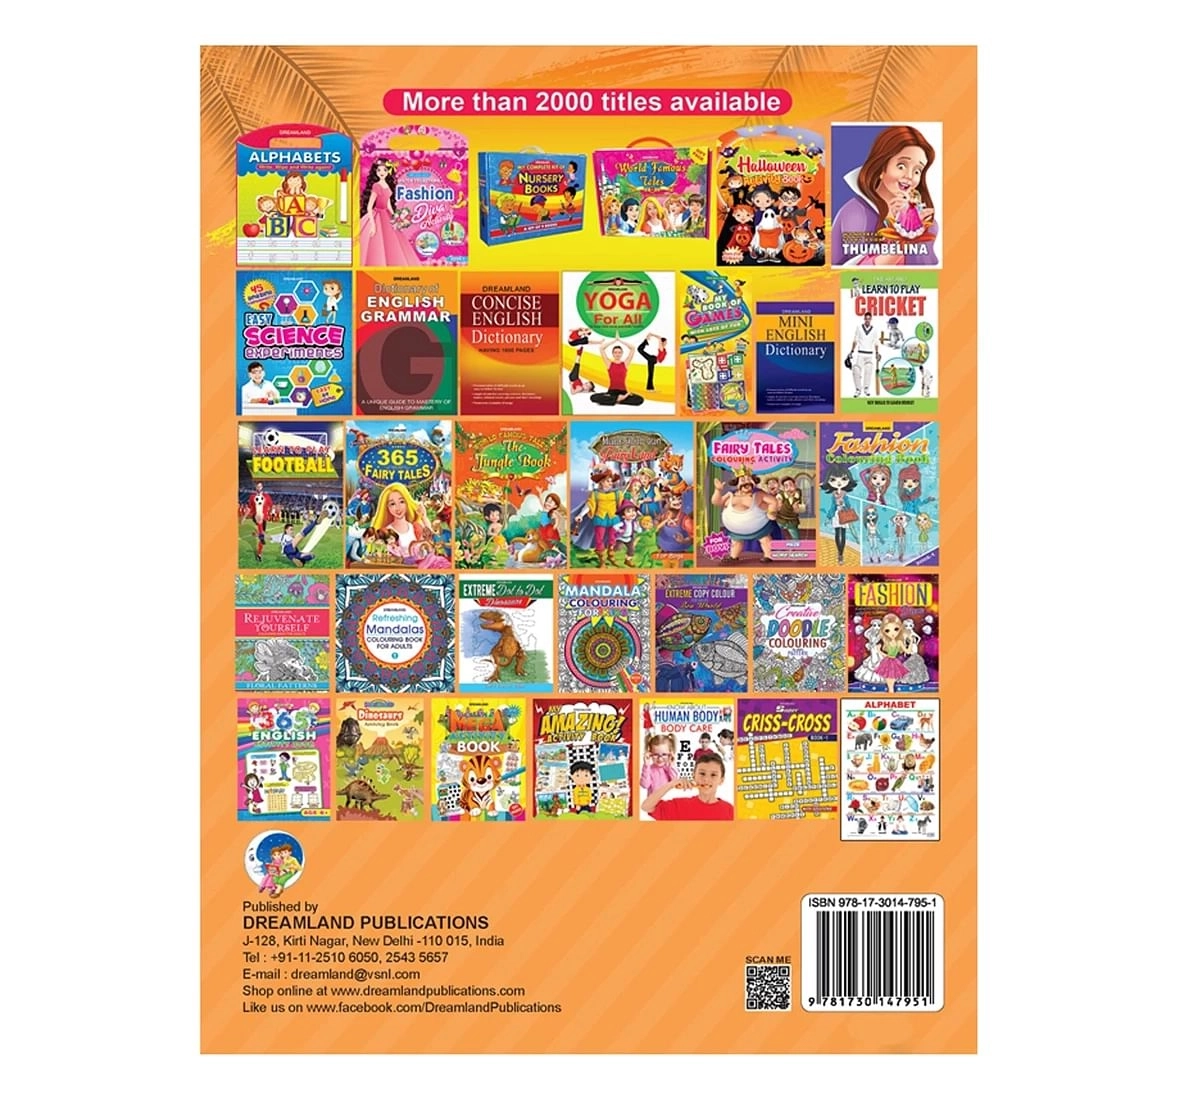 Dreamland Paper Back The Art of Parenting Book for kids 3Y+, Multicolour